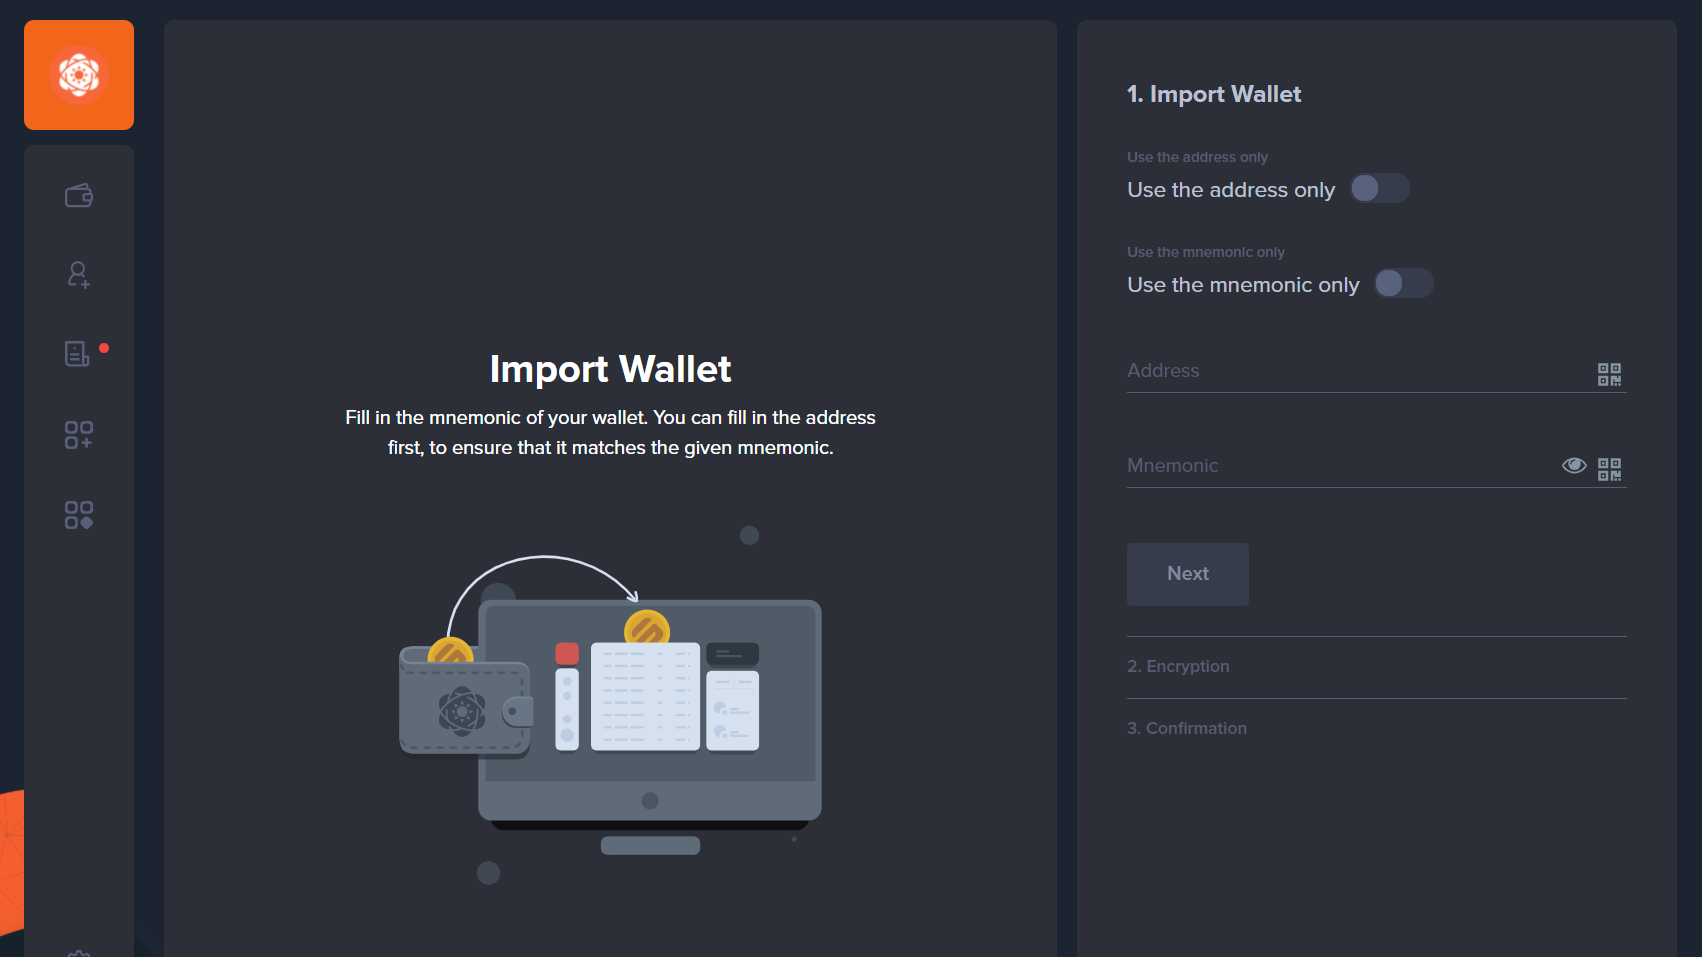 Import your wallet by providing its address, passphrase, or both